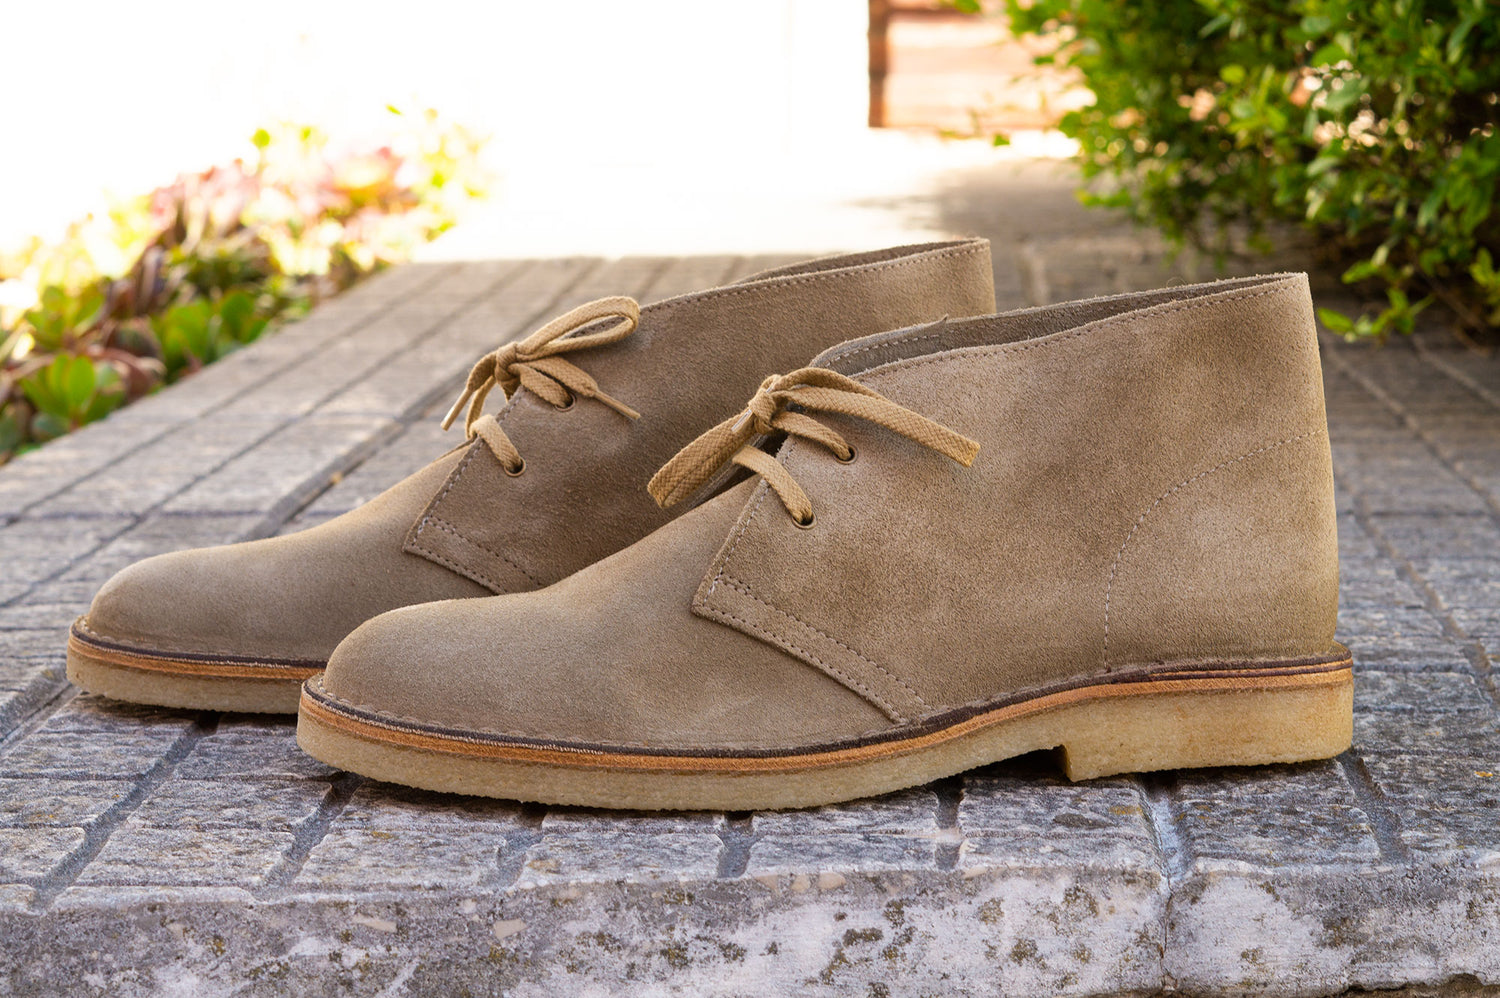 Our Type 01 Desert Boots In a Brand New Colour: Nevada Sand